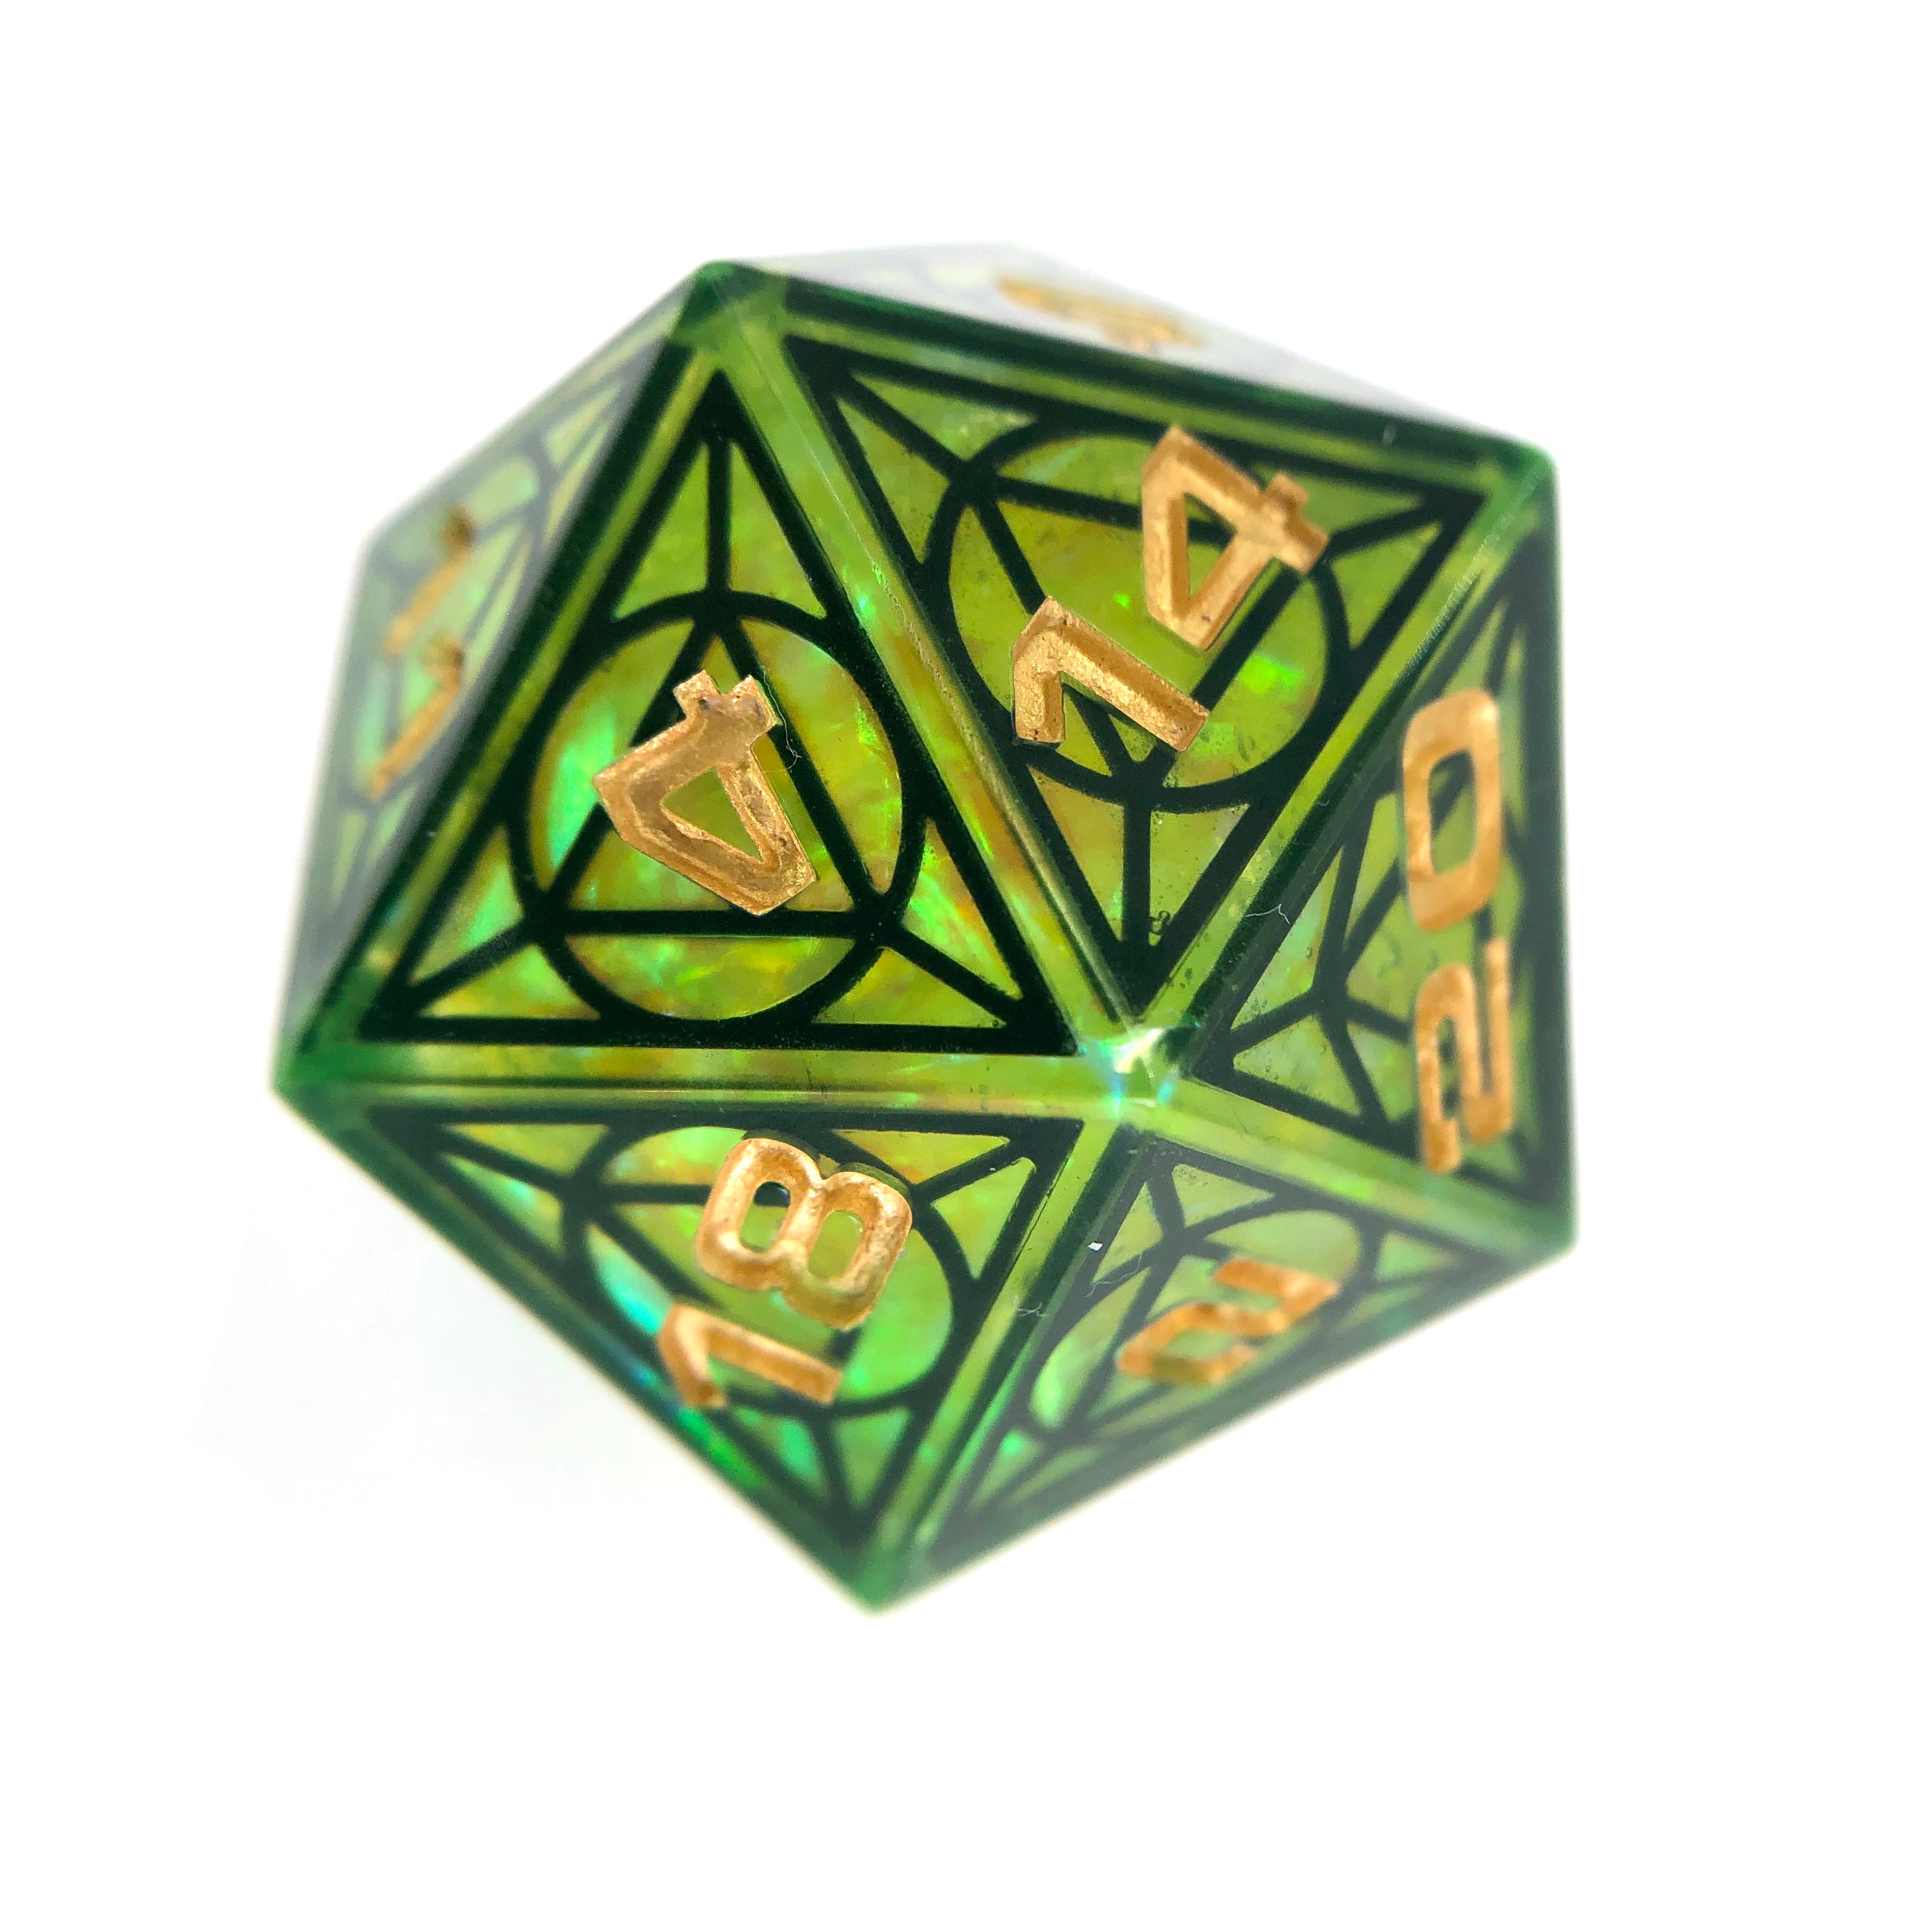 Chartreuse Cathedral 34mm D20 Chonk